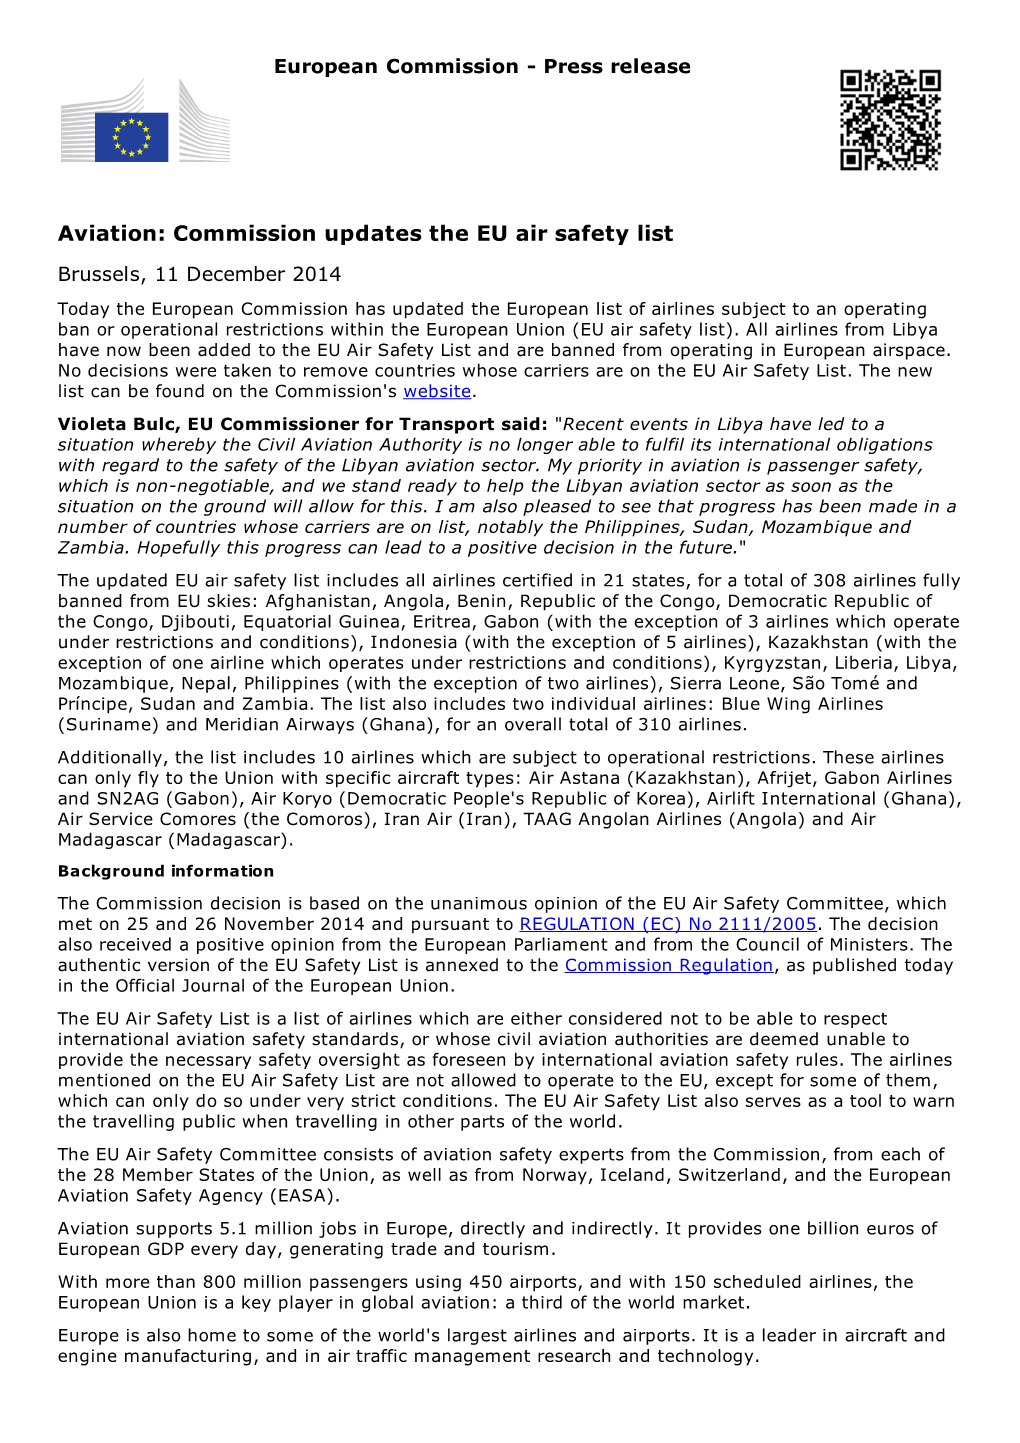 Aviation: Commission Updates the EU Air Safety List